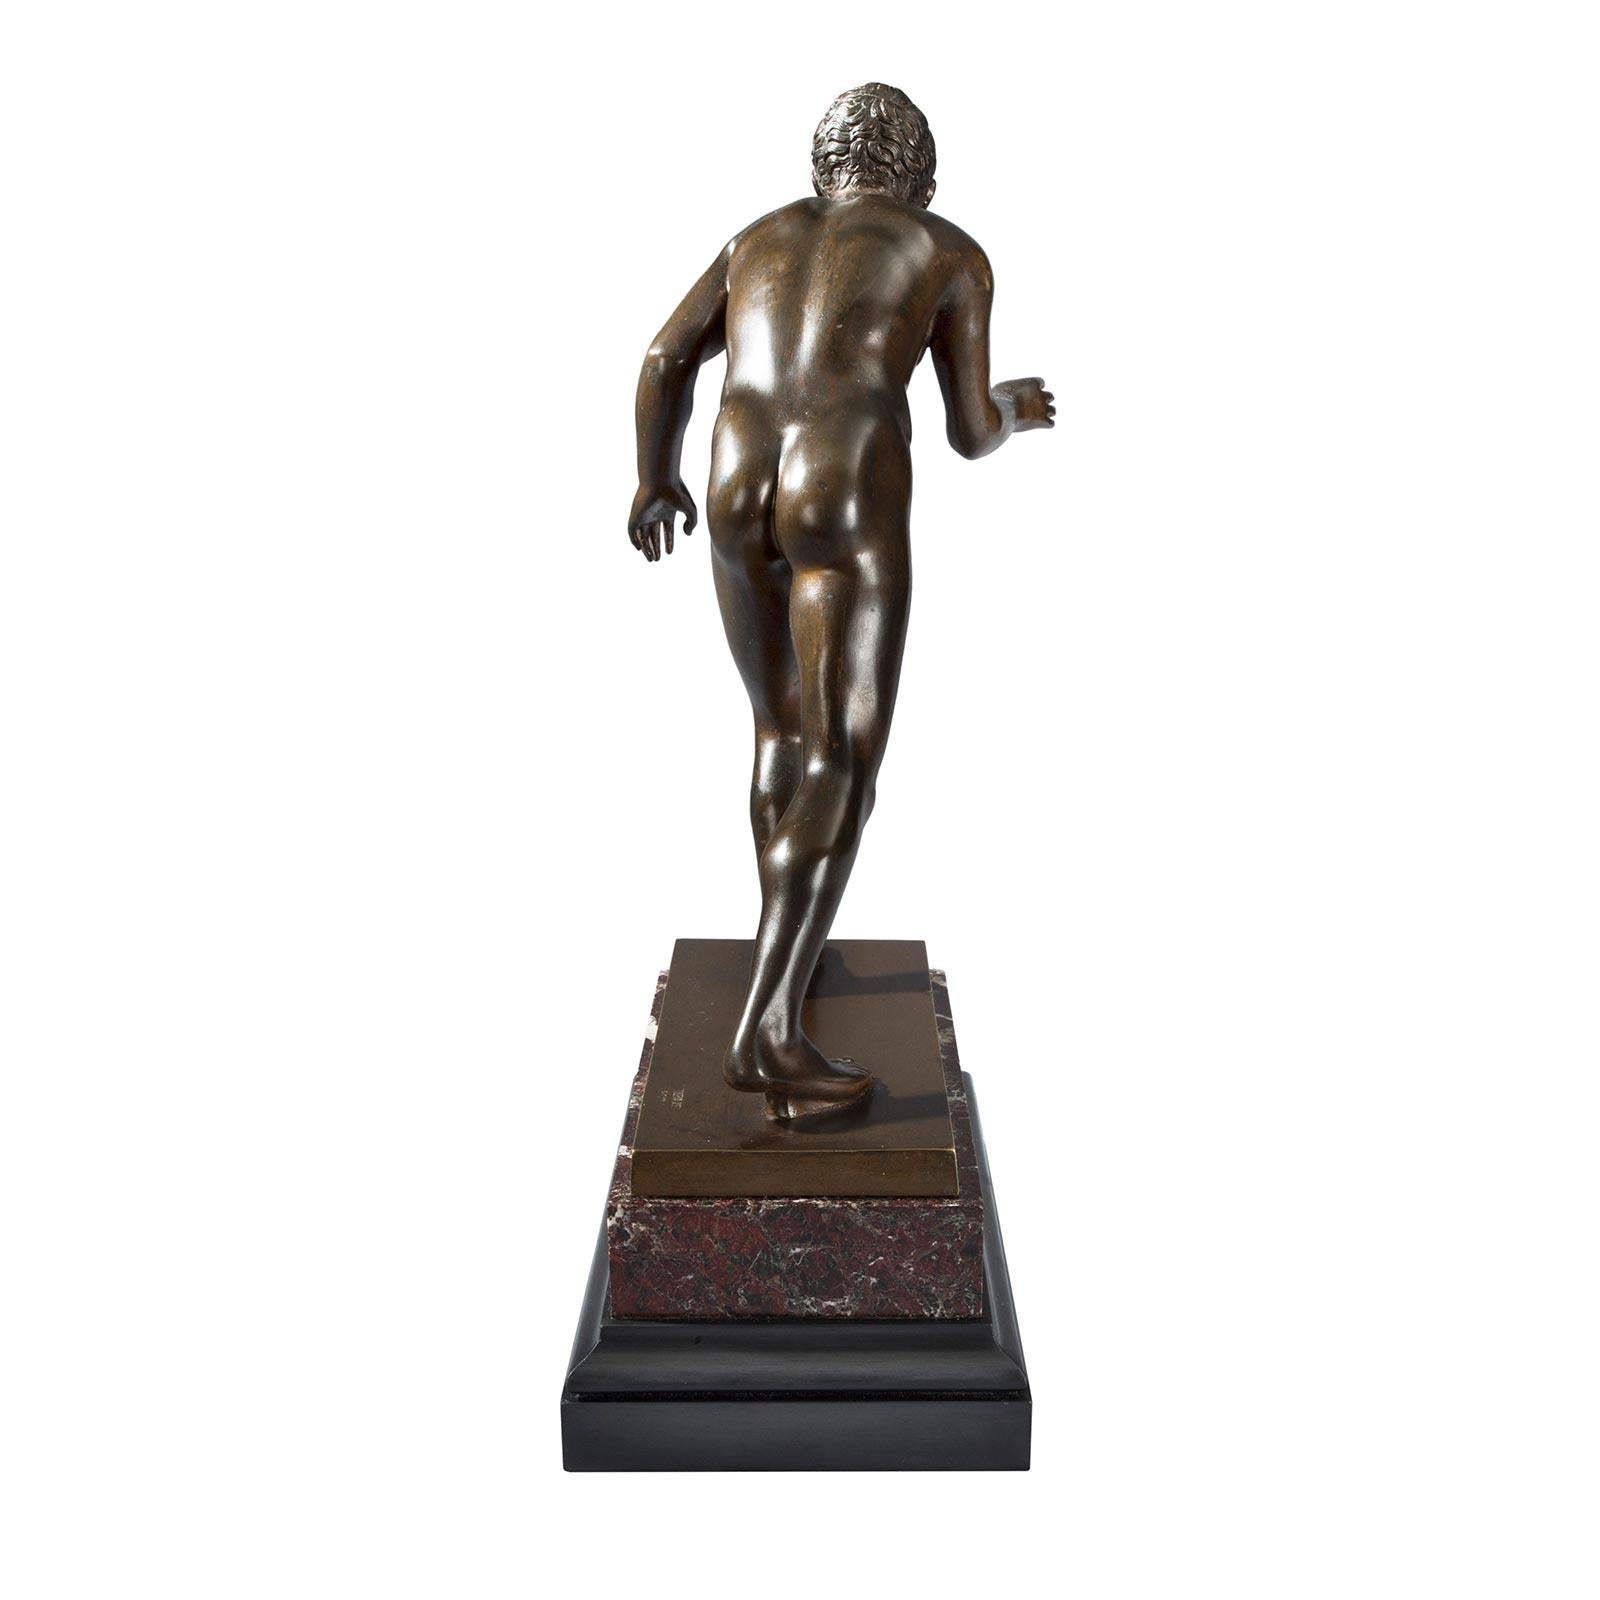 Italian 19th Century Grand Tour Period Patinated Bronze of a Roman Athlete In Good Condition For Sale In West Palm Beach, FL